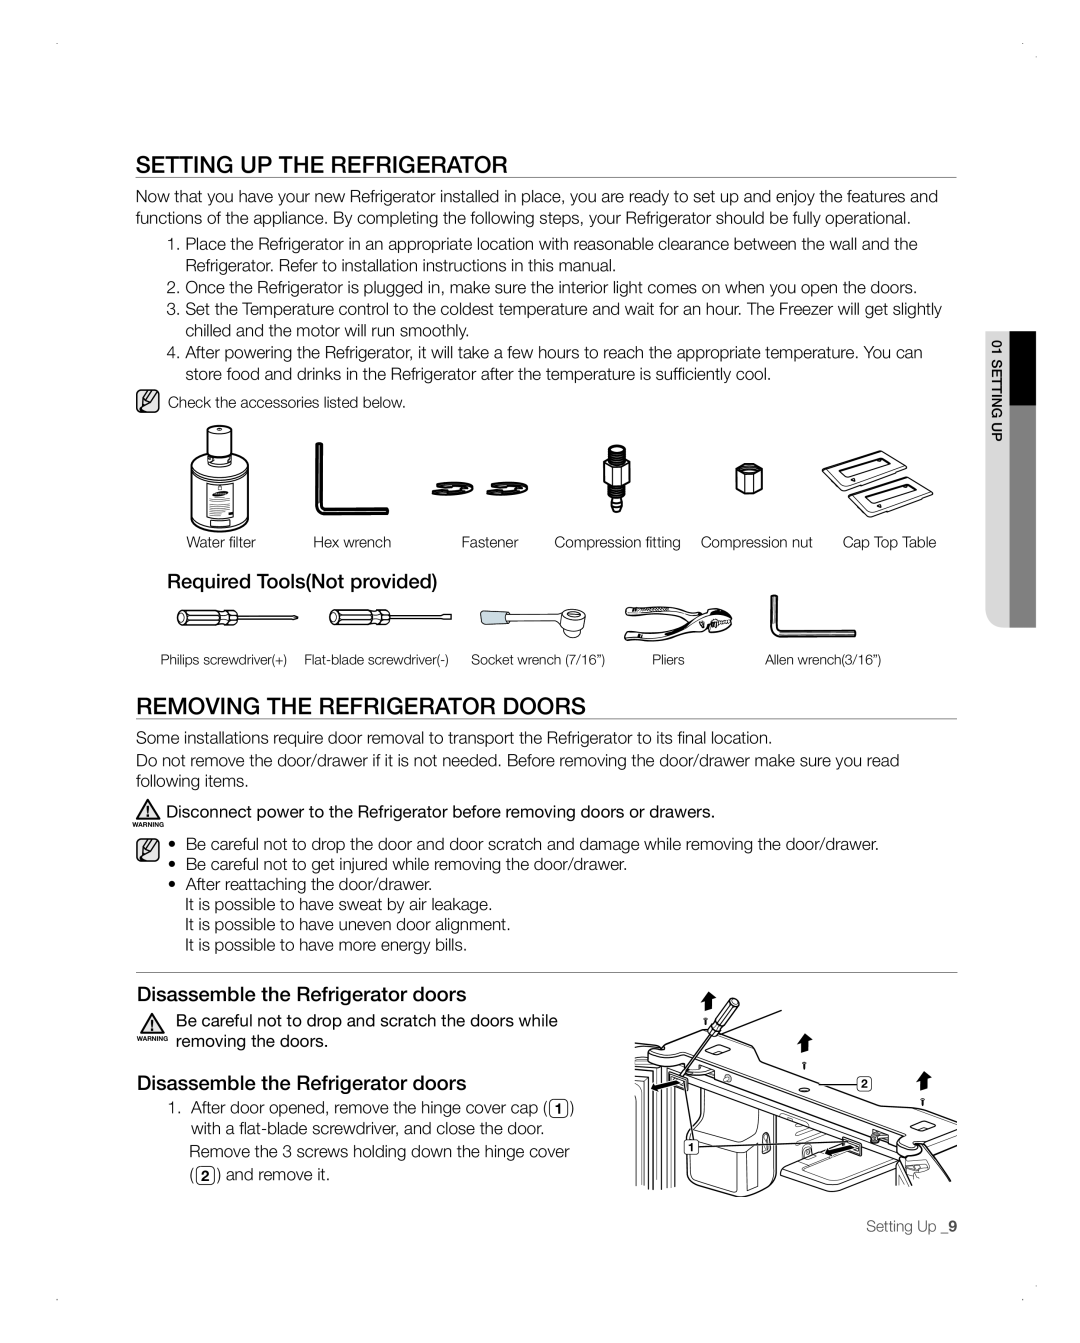 Samsung RFG298AARS user manual setting uP tHe ReFRigeRAtoR, Removing the refrigerator doors, Required ToolsNot provided 